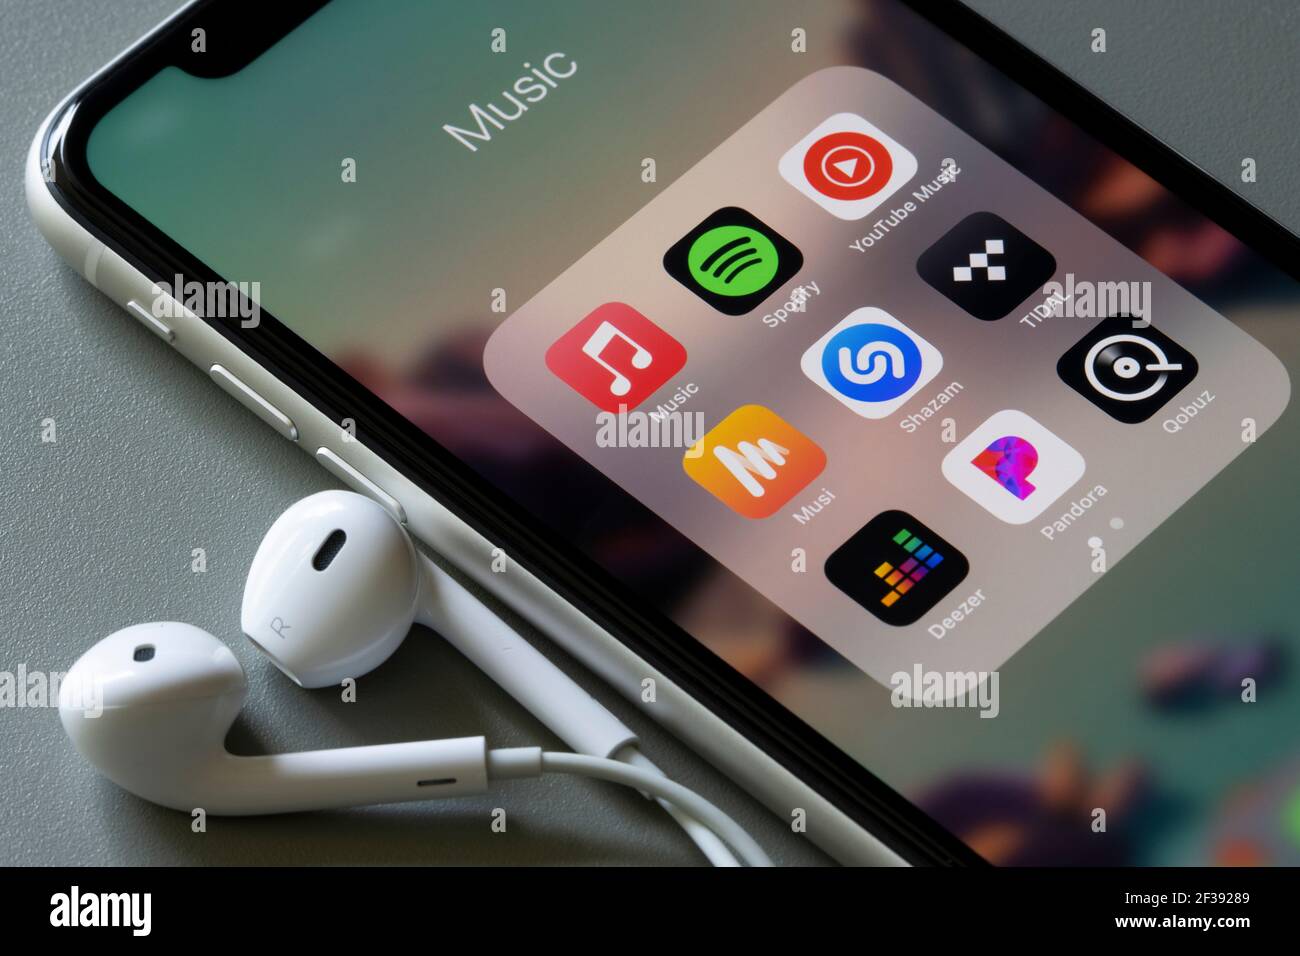 Assorted music apps are seen on an iPhone - Apple Music, Spotify, YouTube Music, Musi, Shazam, TIDAL, Deezer, Pandora, and Qobuz. Stock Photo